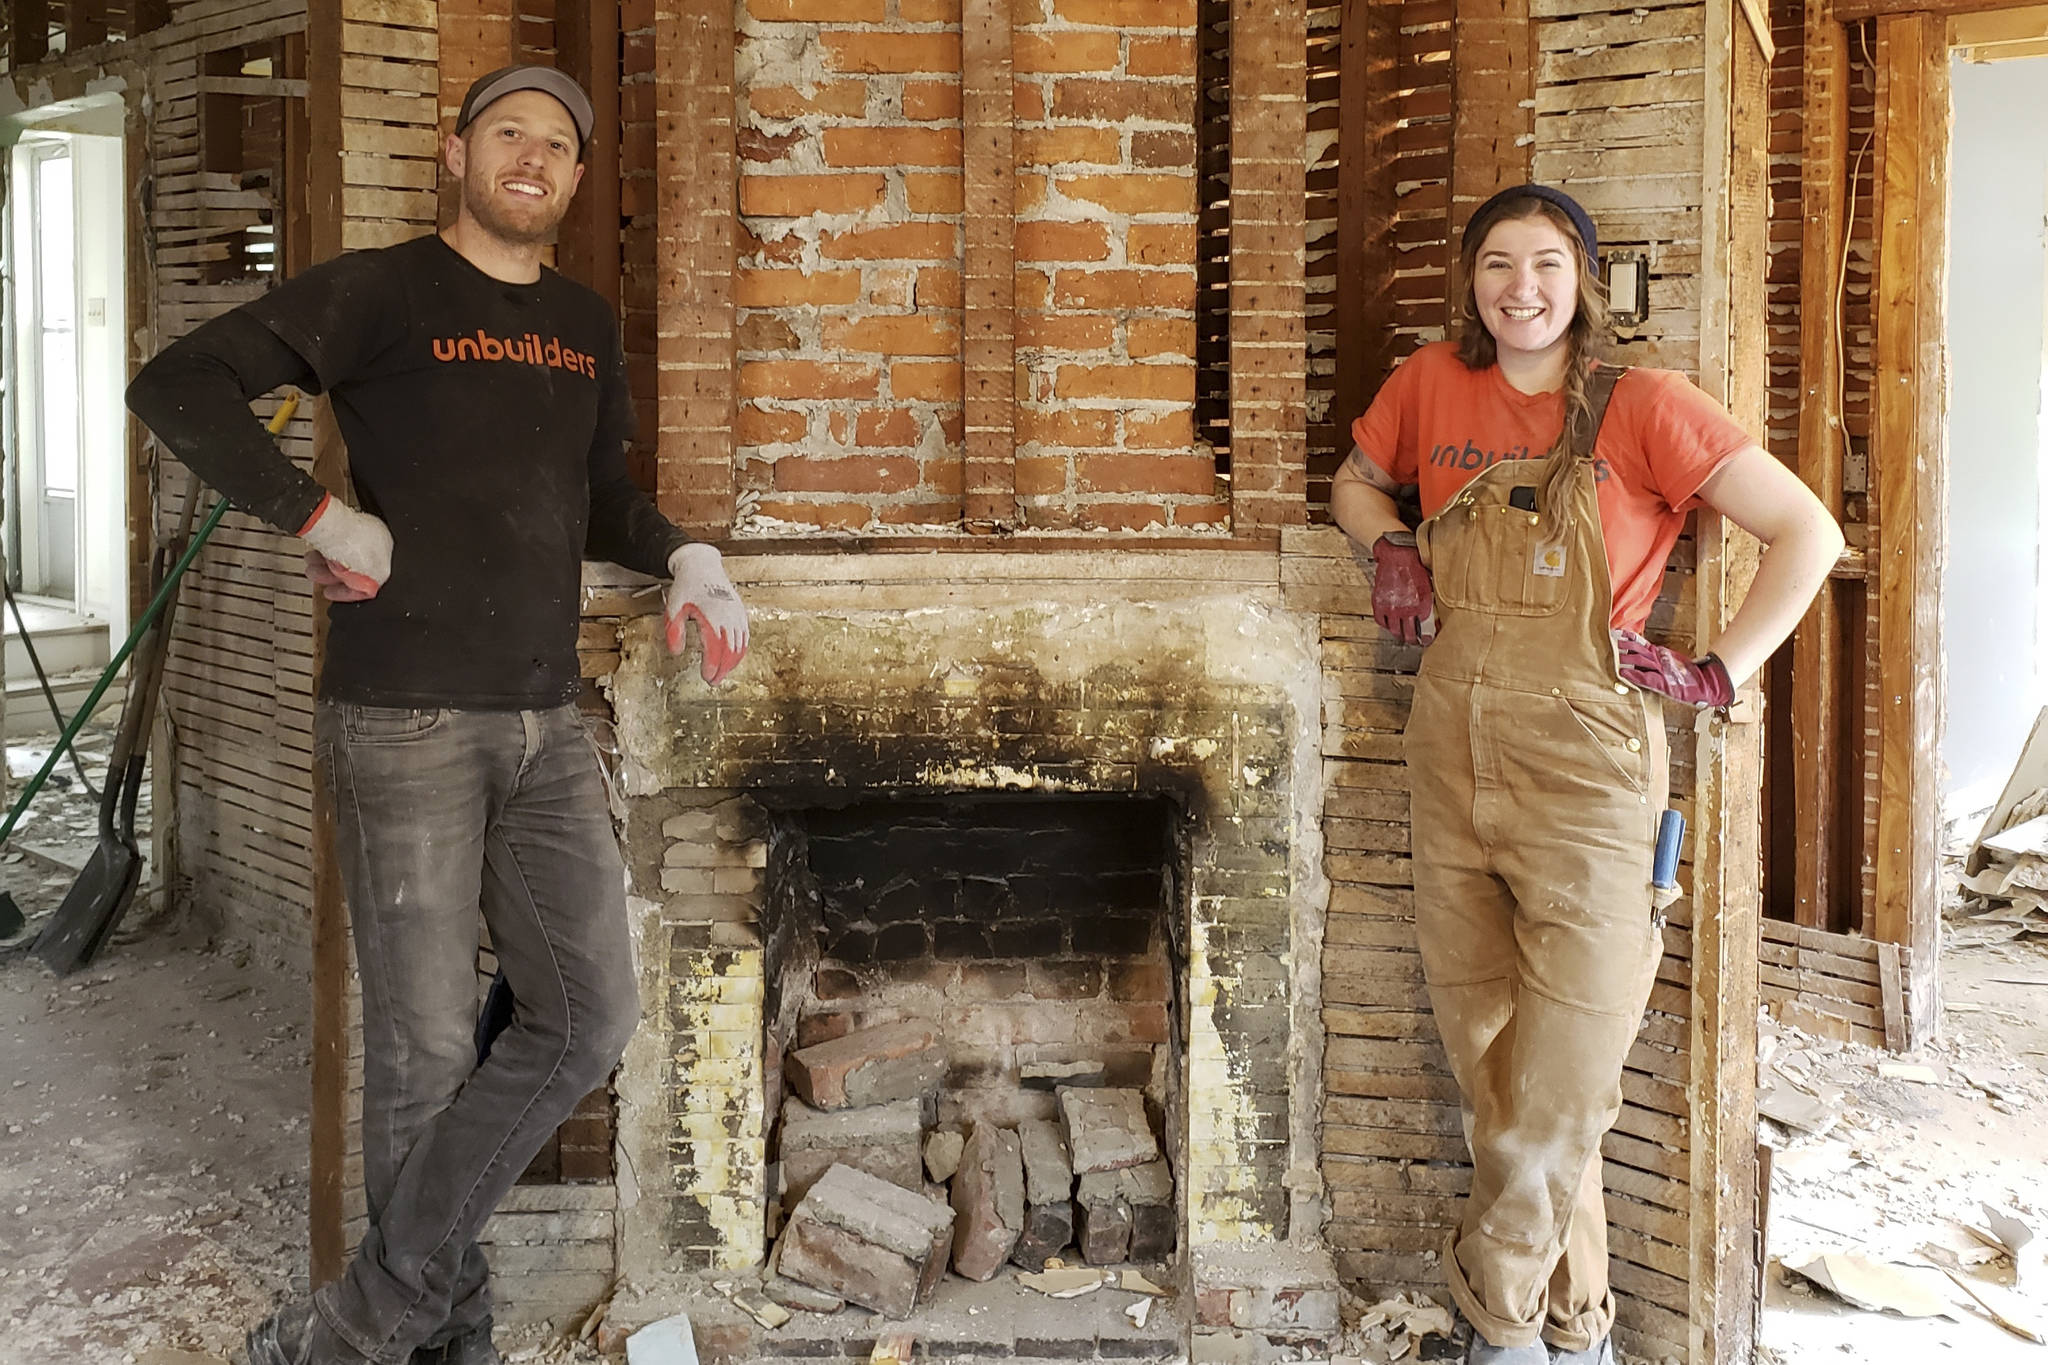 Unbuilders owner Adam Corneil with employee Erin Watkins in front of a deconstructed hearth. Unbuilders crews carefully deconstruct old homes to rescue as many reusable materials as possible, including old-growth timber. (Unbuilders photo)